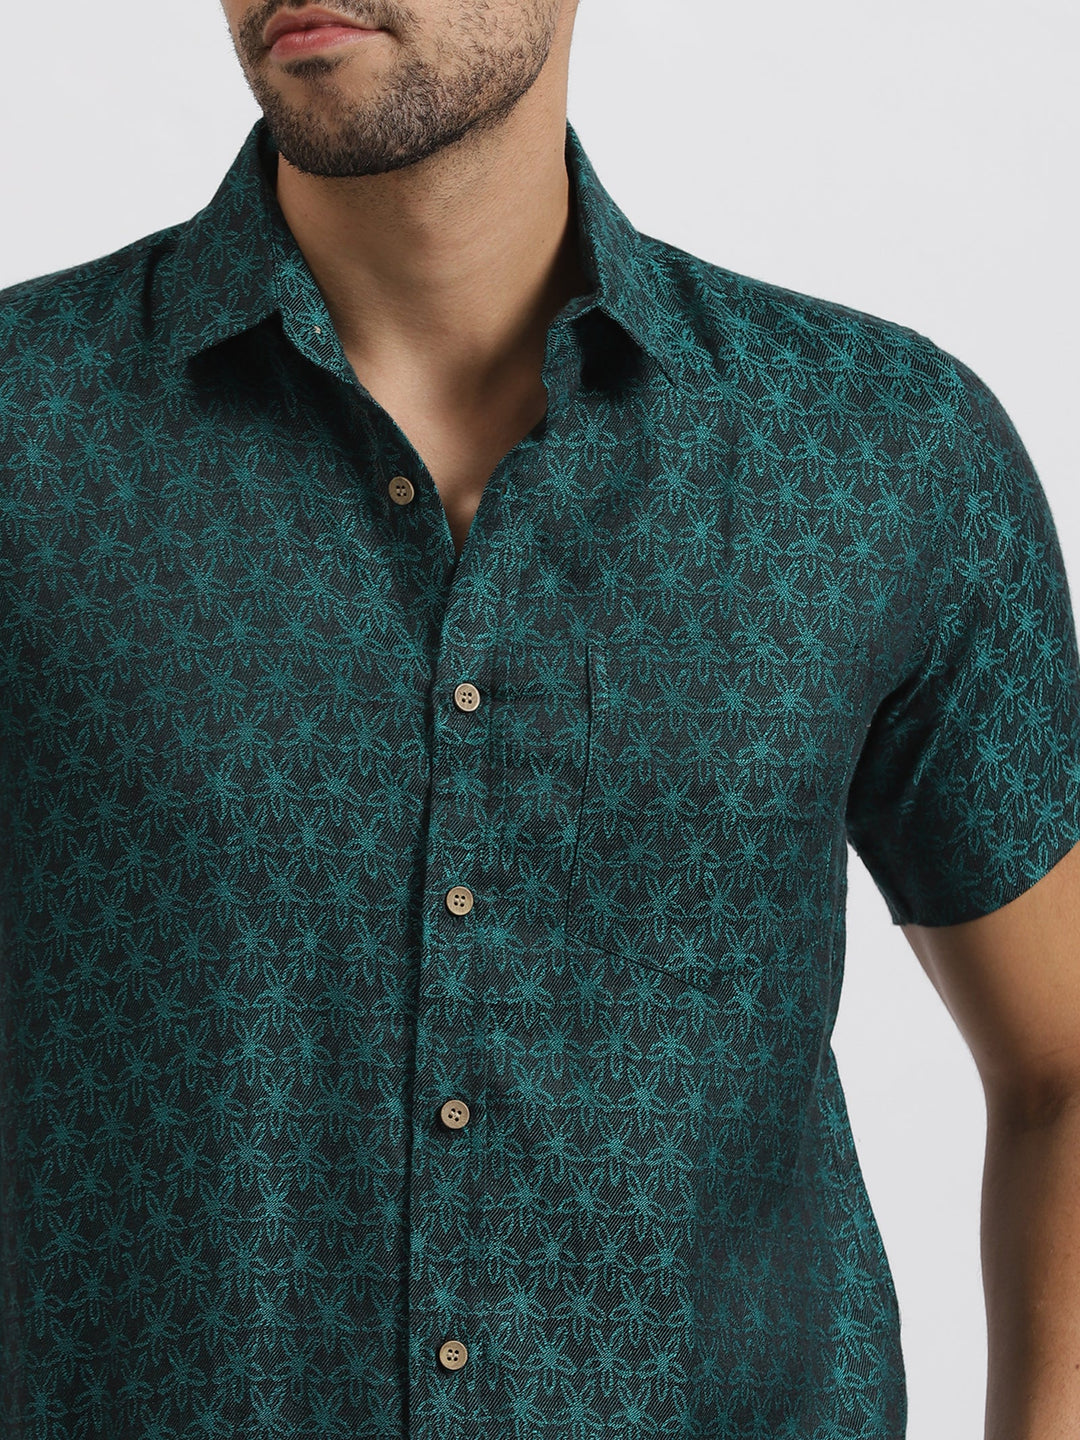 Abel - Pure Linen Floral Jacquard Half Sleeve Shirt - Peacock Green | Rescue